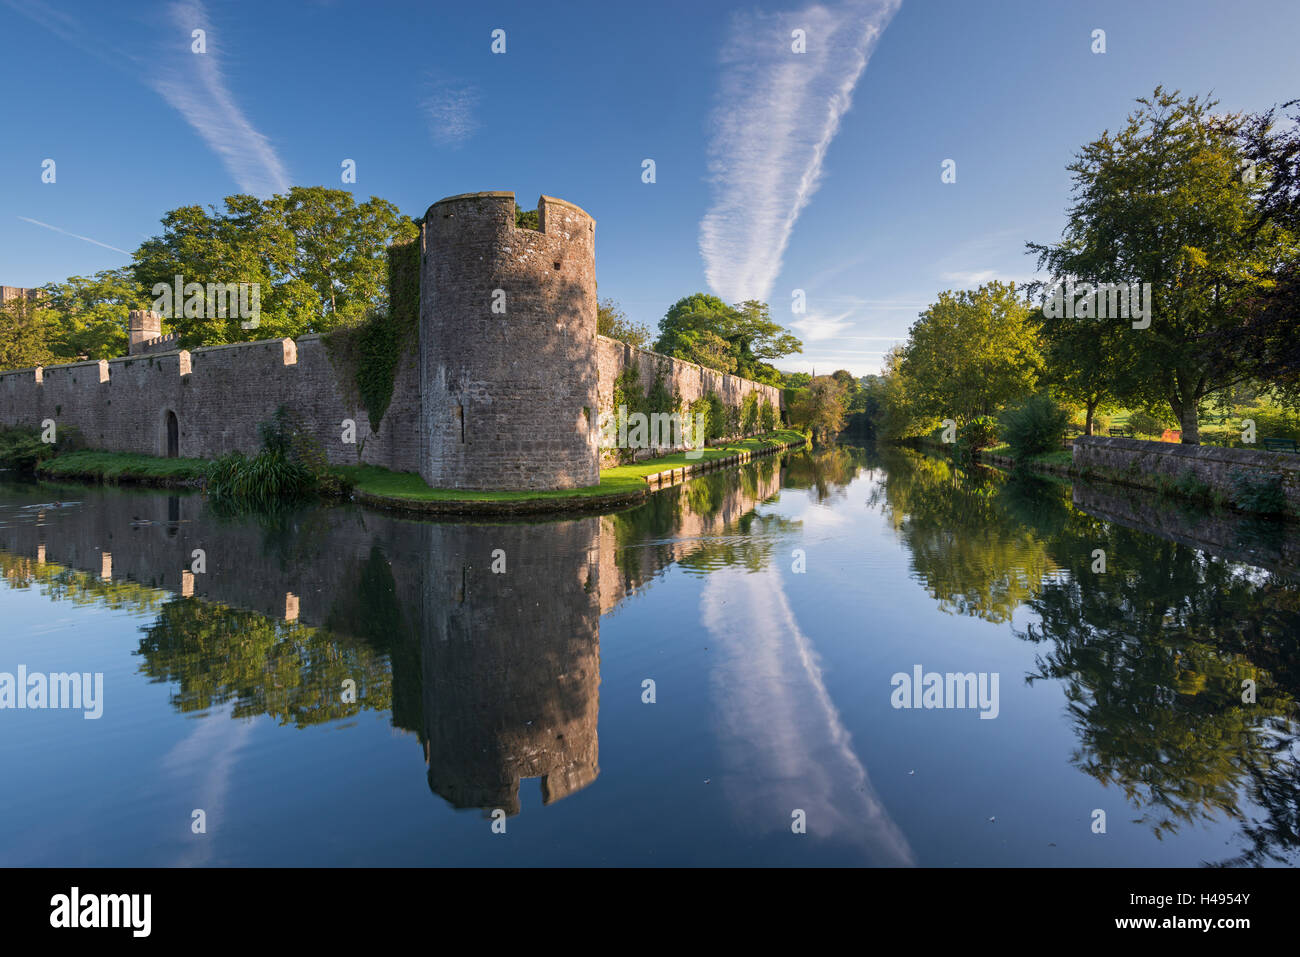 The Bishop's Palace and moat in Wells, Somerset, England. Autumn (September) 2013. Stock Photo